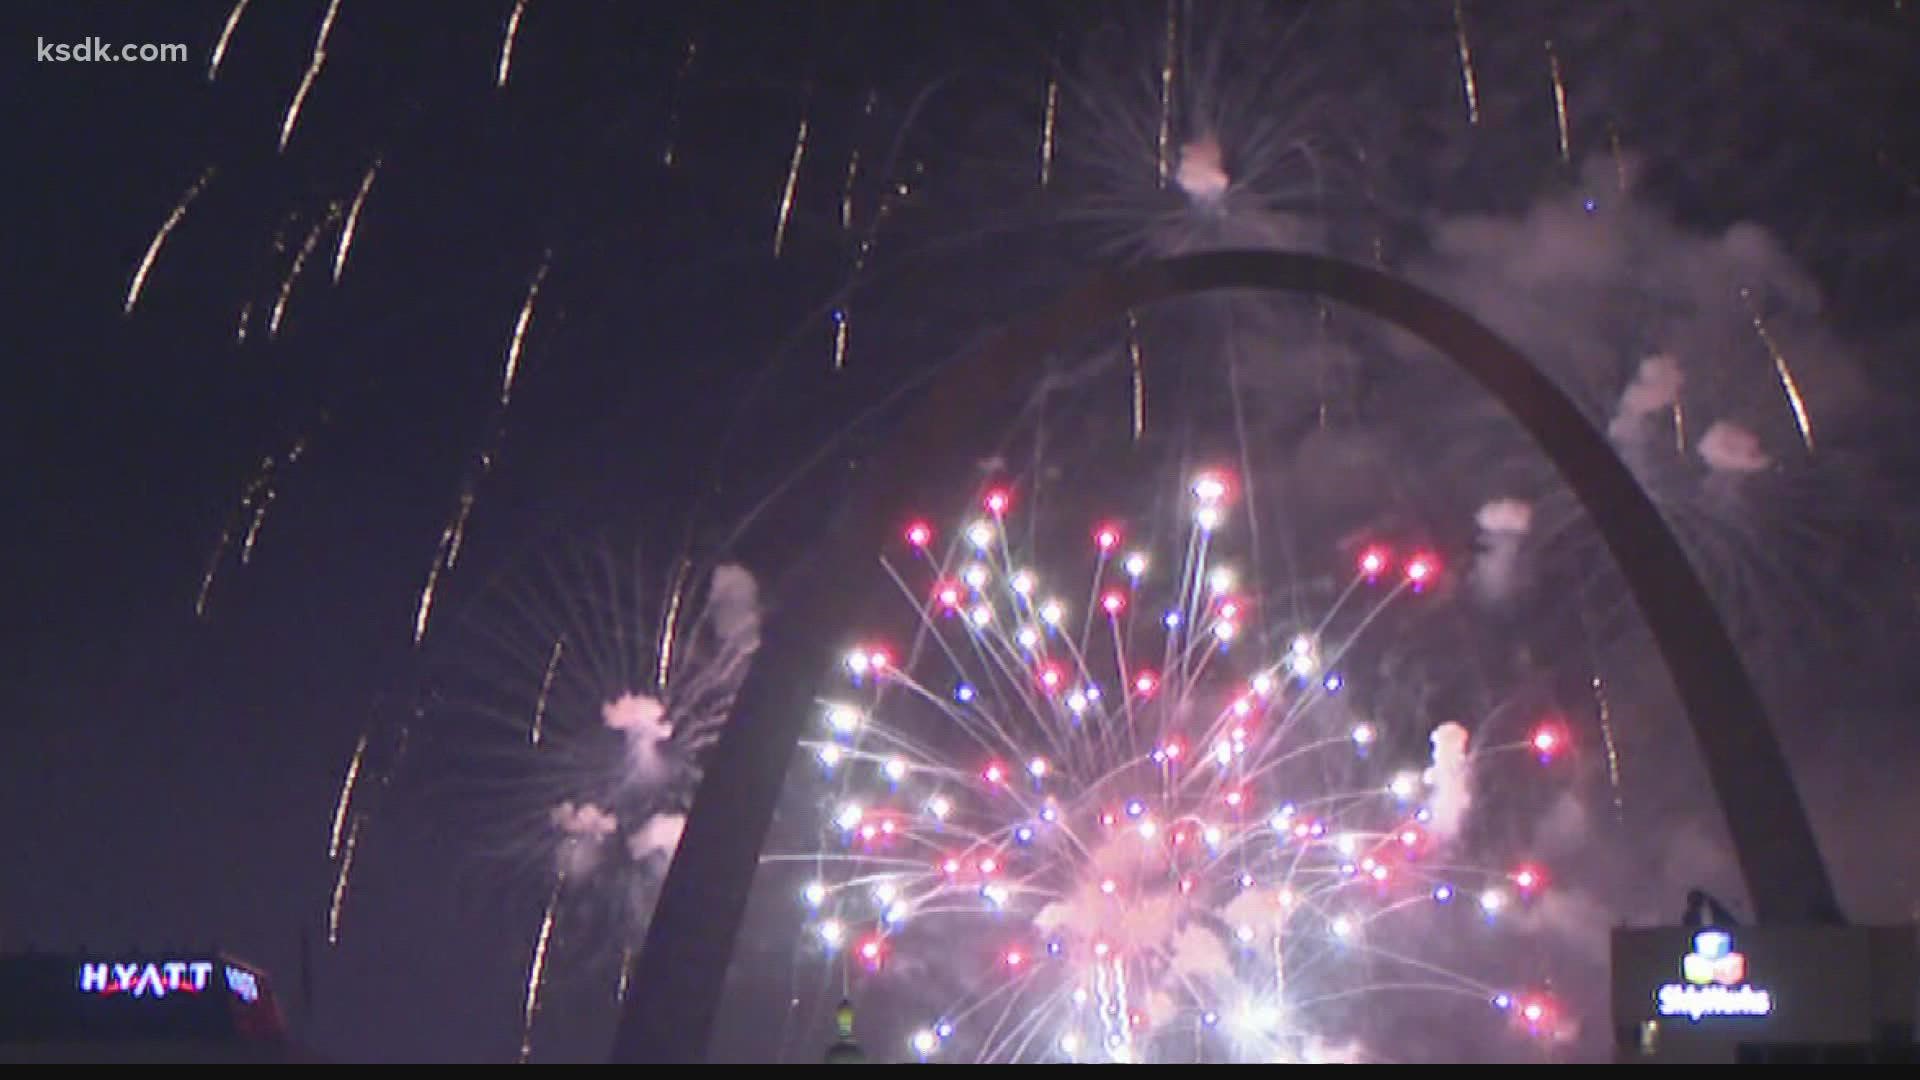 Like last year, Fair Saint Louis organizers are planning one big fireworks show on July 4 instead of several nights of fireworks.